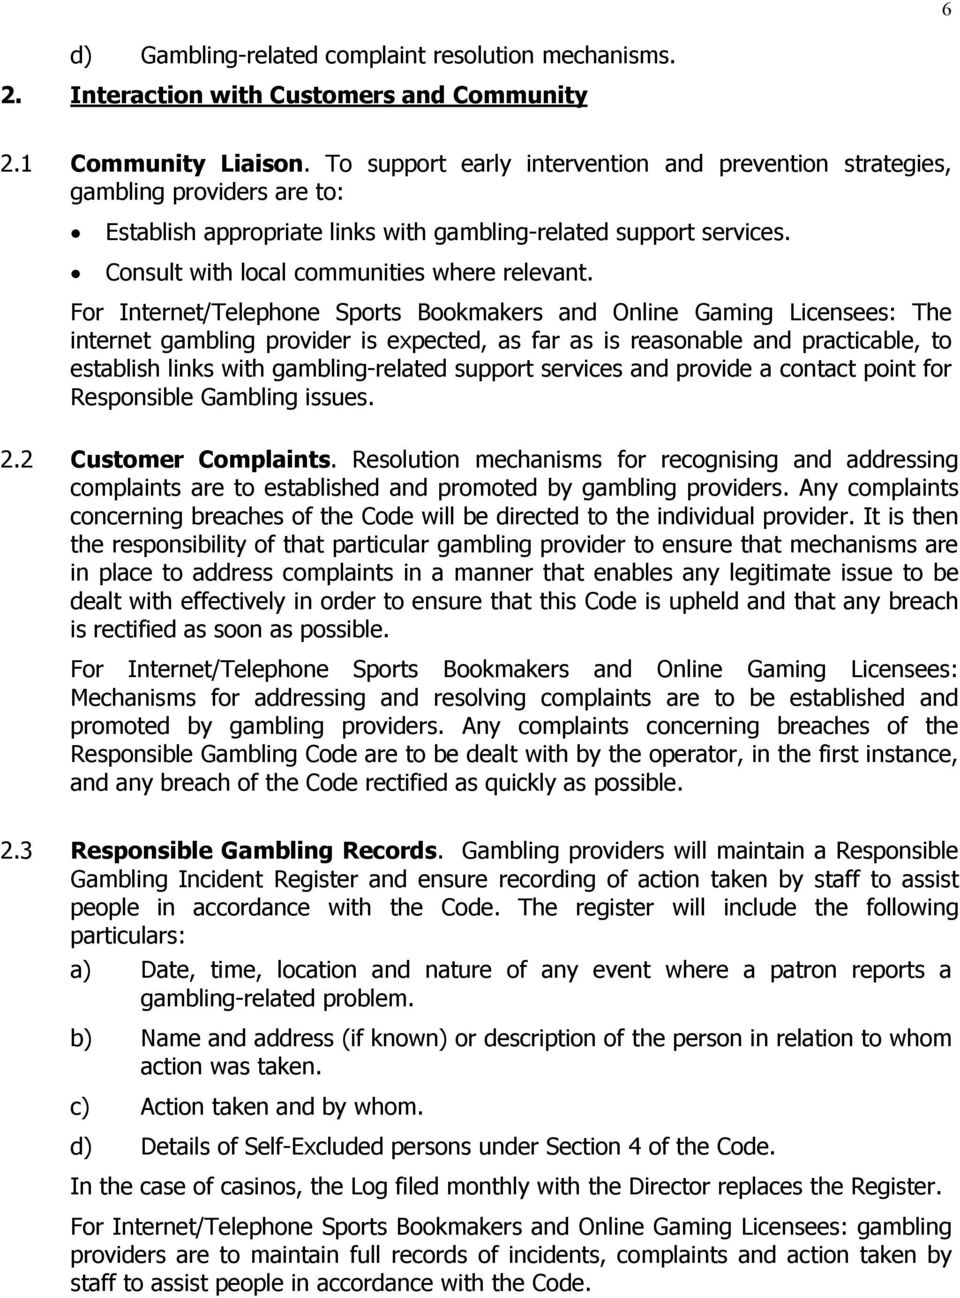 For Internet/Telephone Sports Bookmakers and Online Gaming Licensees: The internet gambling provider is expected, as far as is reasonable and practicable, to establish links with gambling-related